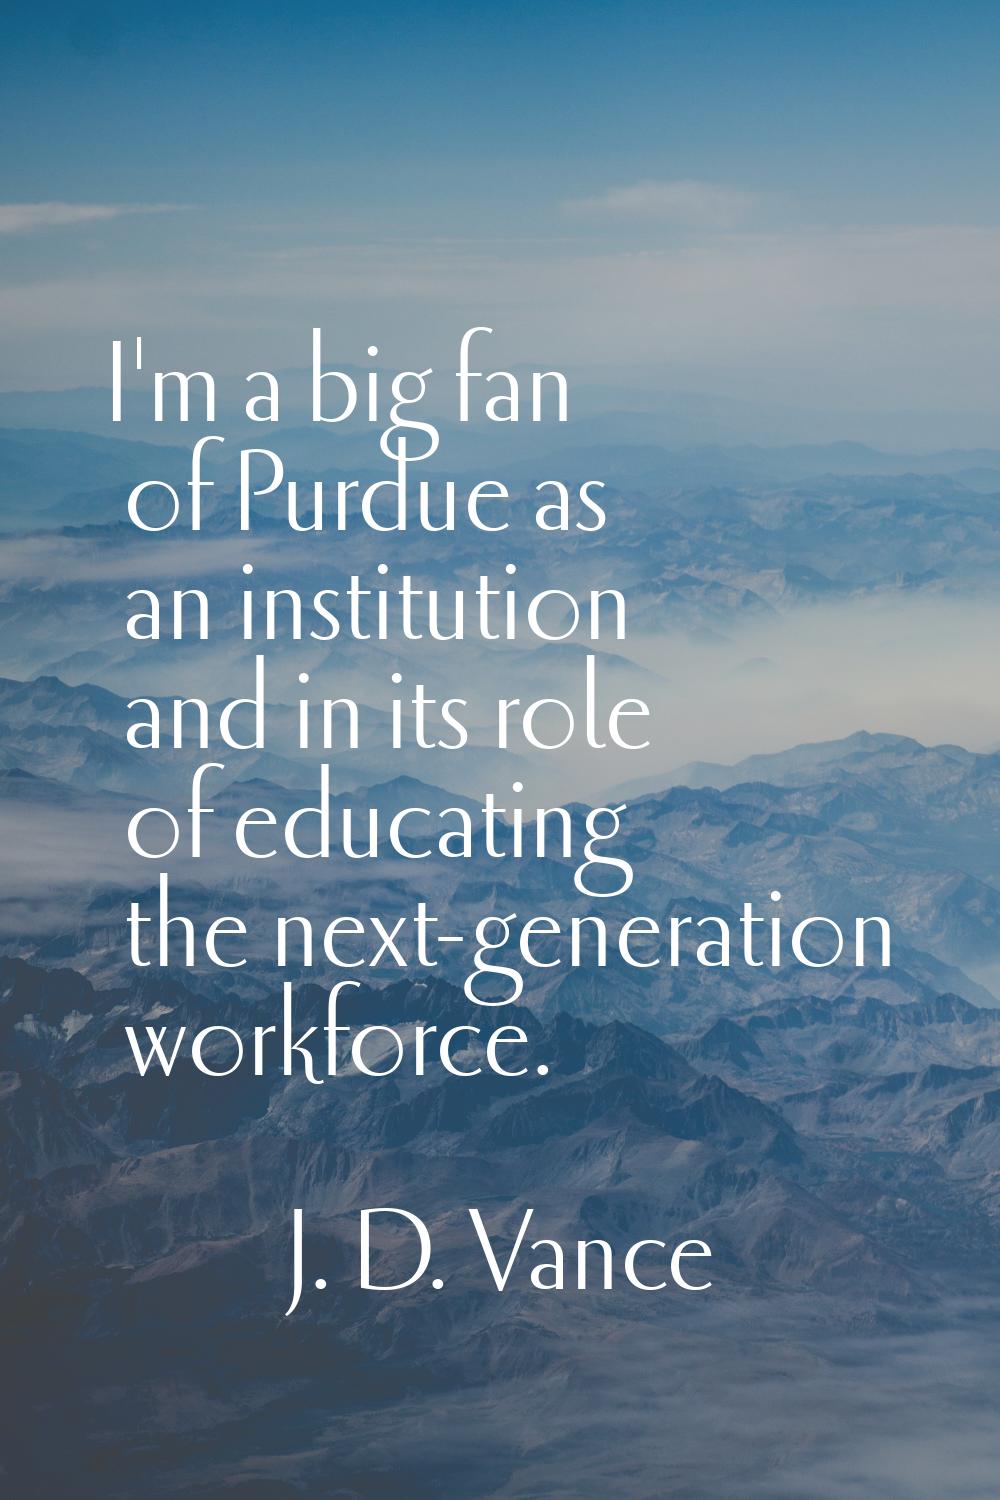 I'm a big fan of Purdue as an institution and in its role of educating the next-generation workforc